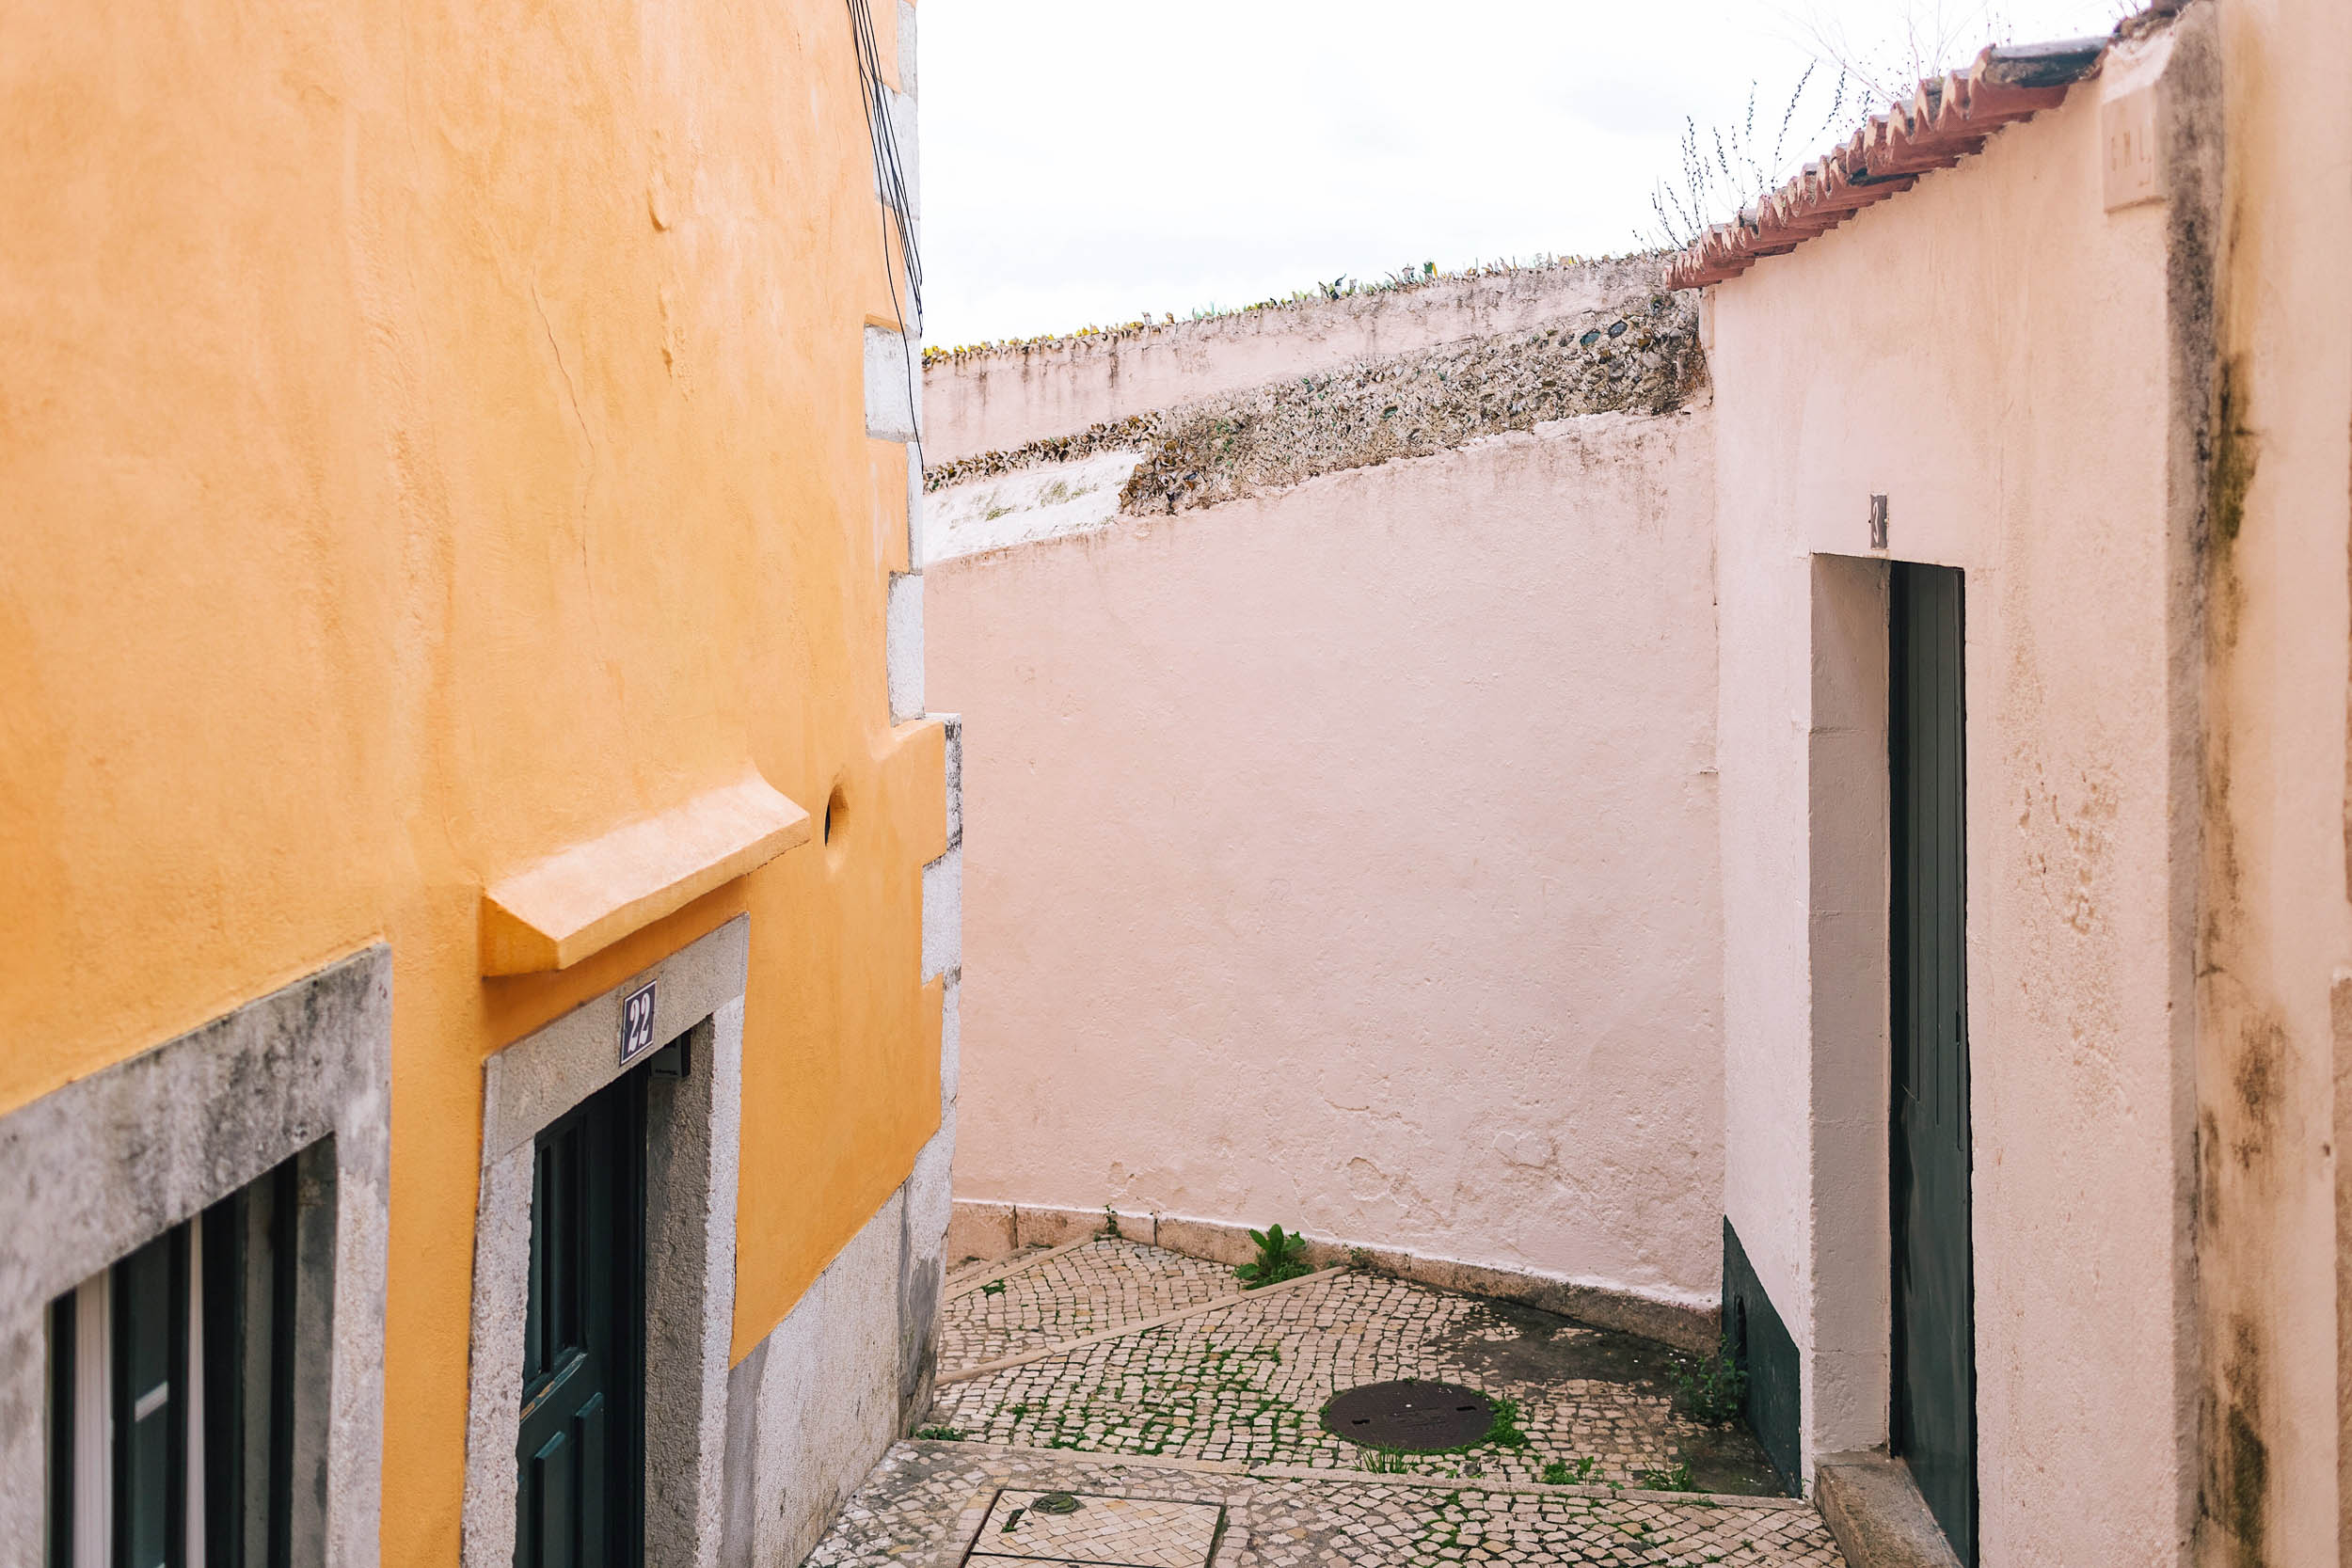 Make sure to spend time roaming Alfama when visiting Lisbon